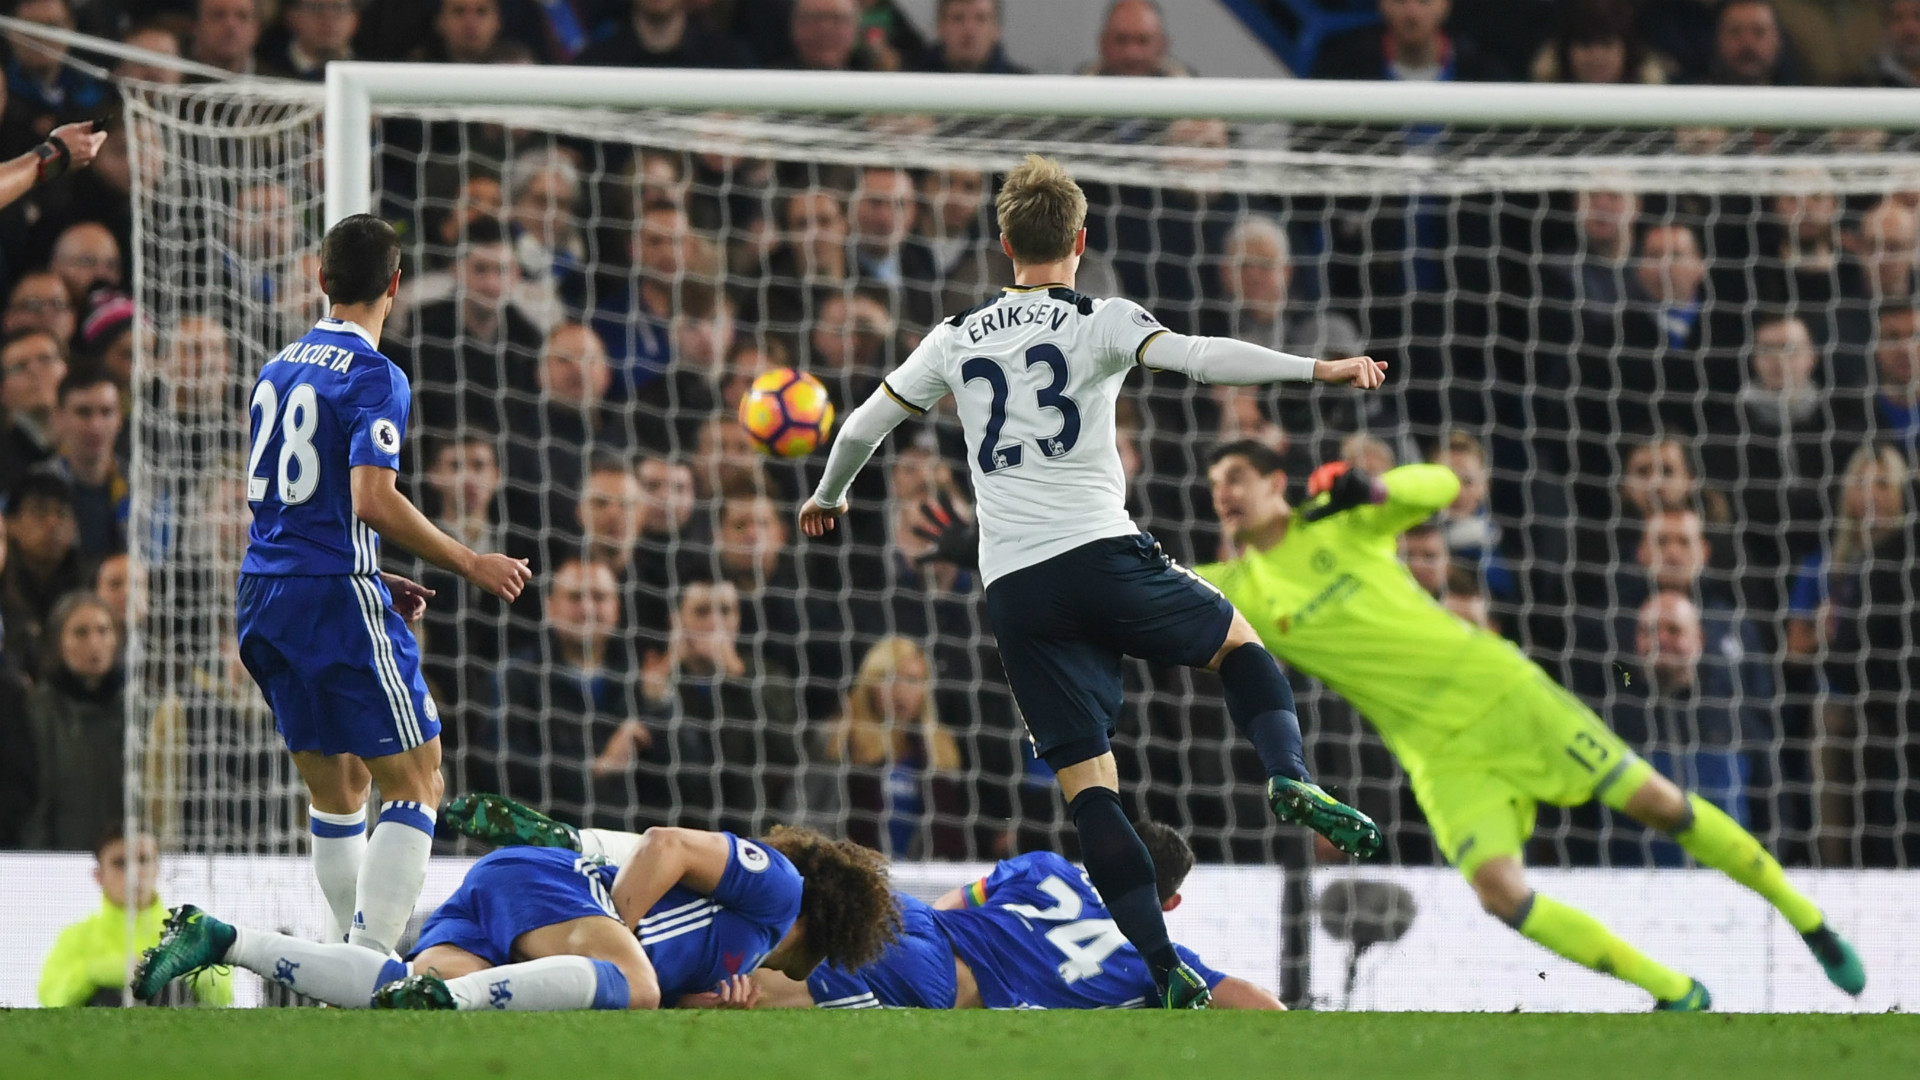 http://images.performgroup.com/di/library/GOAL_INTERNATIONAL/66/b5/chelsea-spurs-hd_/